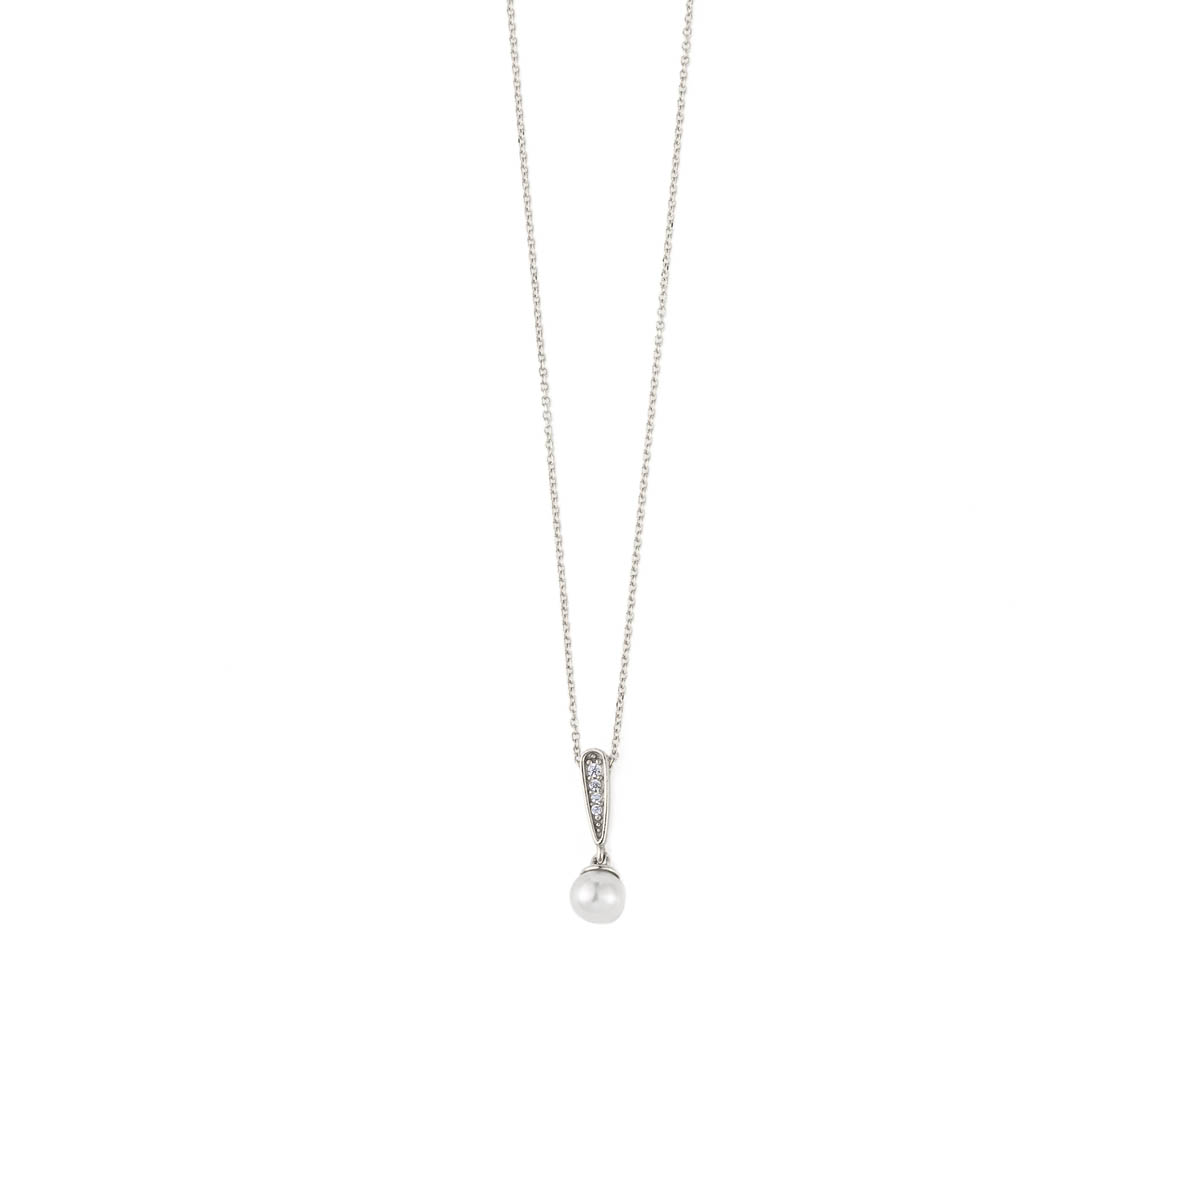 Pearl and Zircon Charm Necklace - 9K White Gold